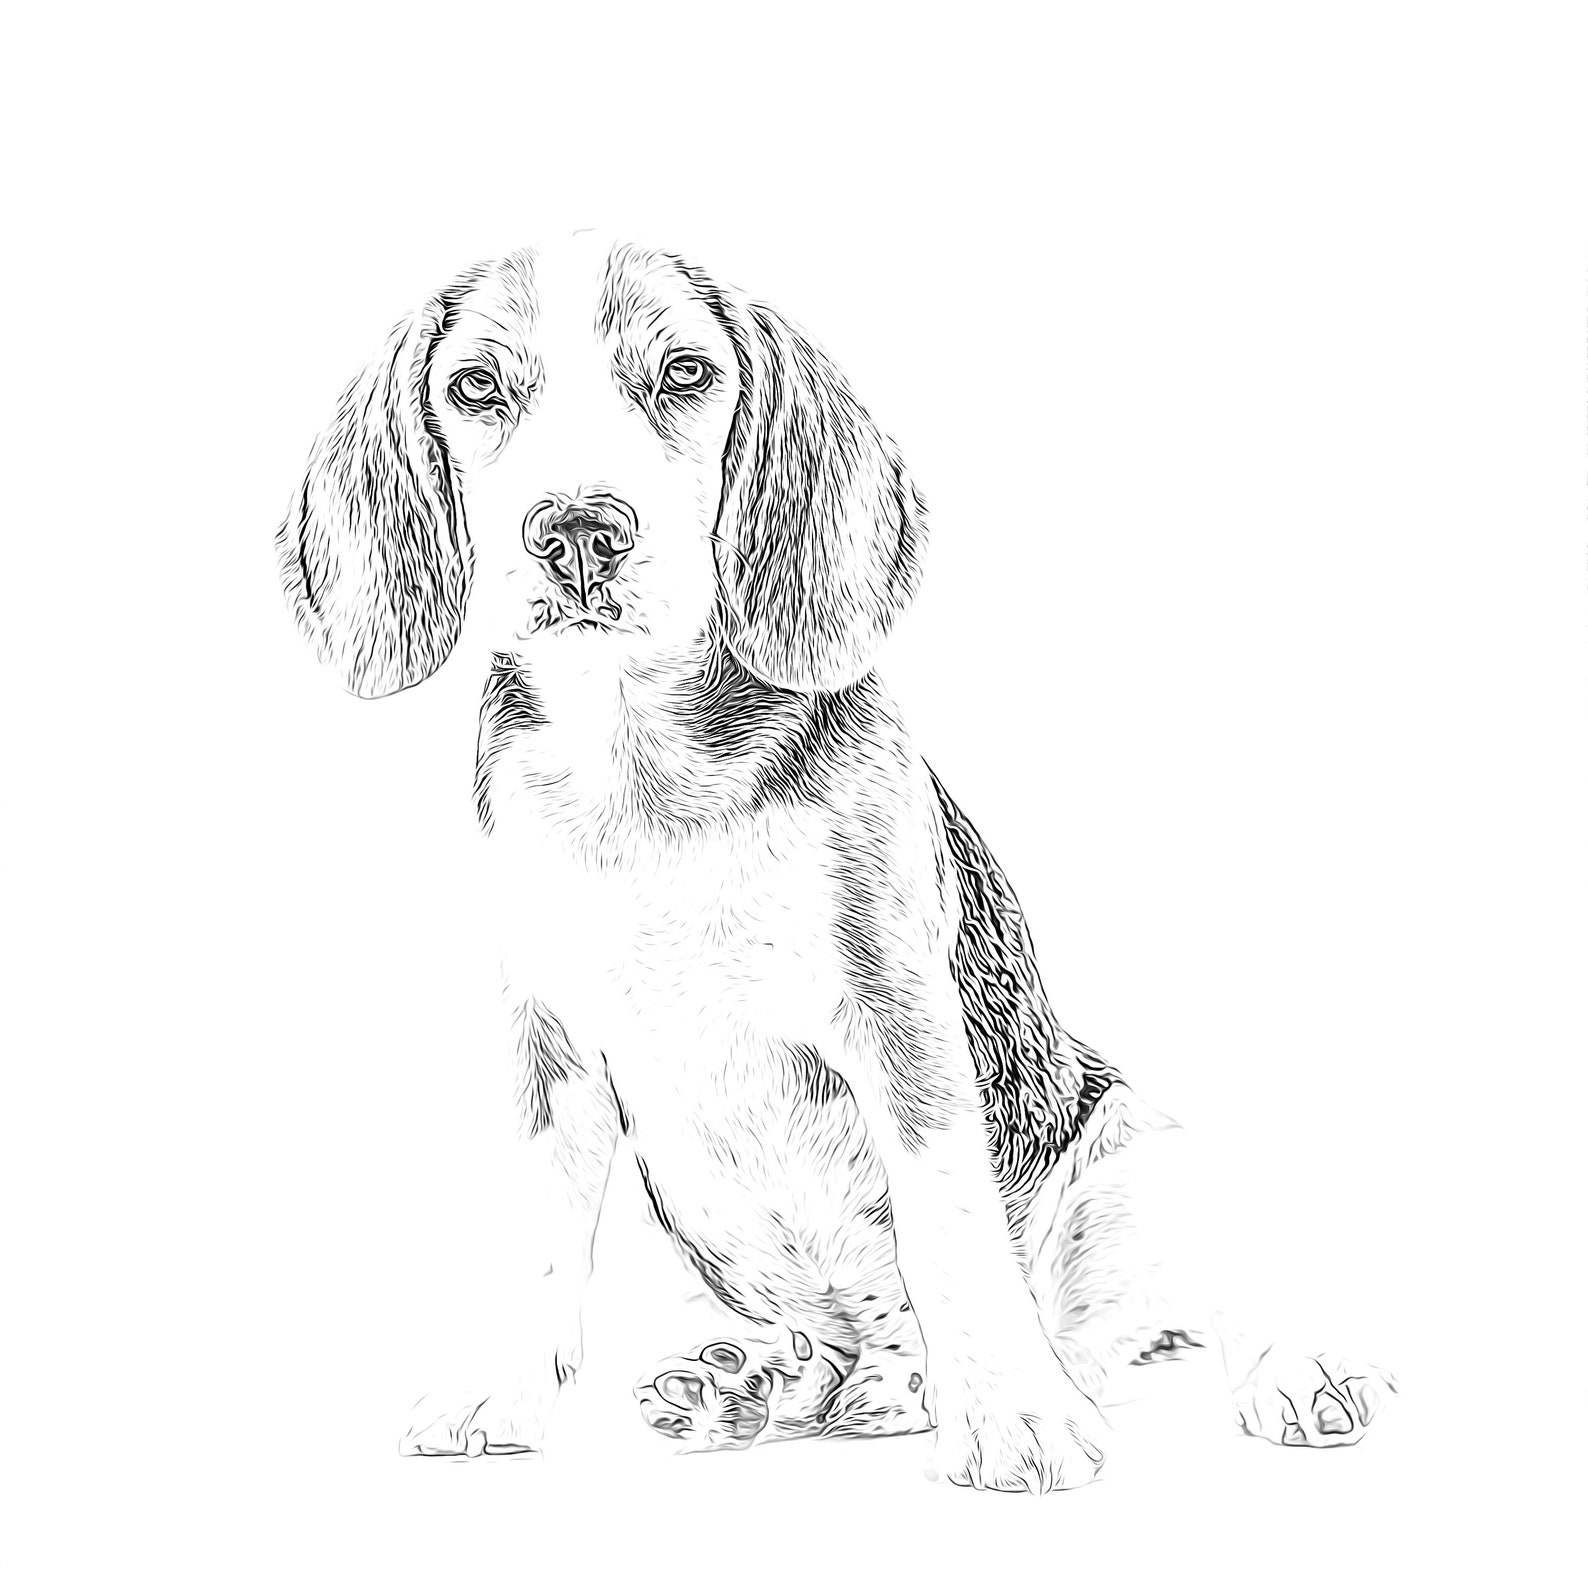 Beagle coloring page dog Adult coloring page realistic for | Etsy